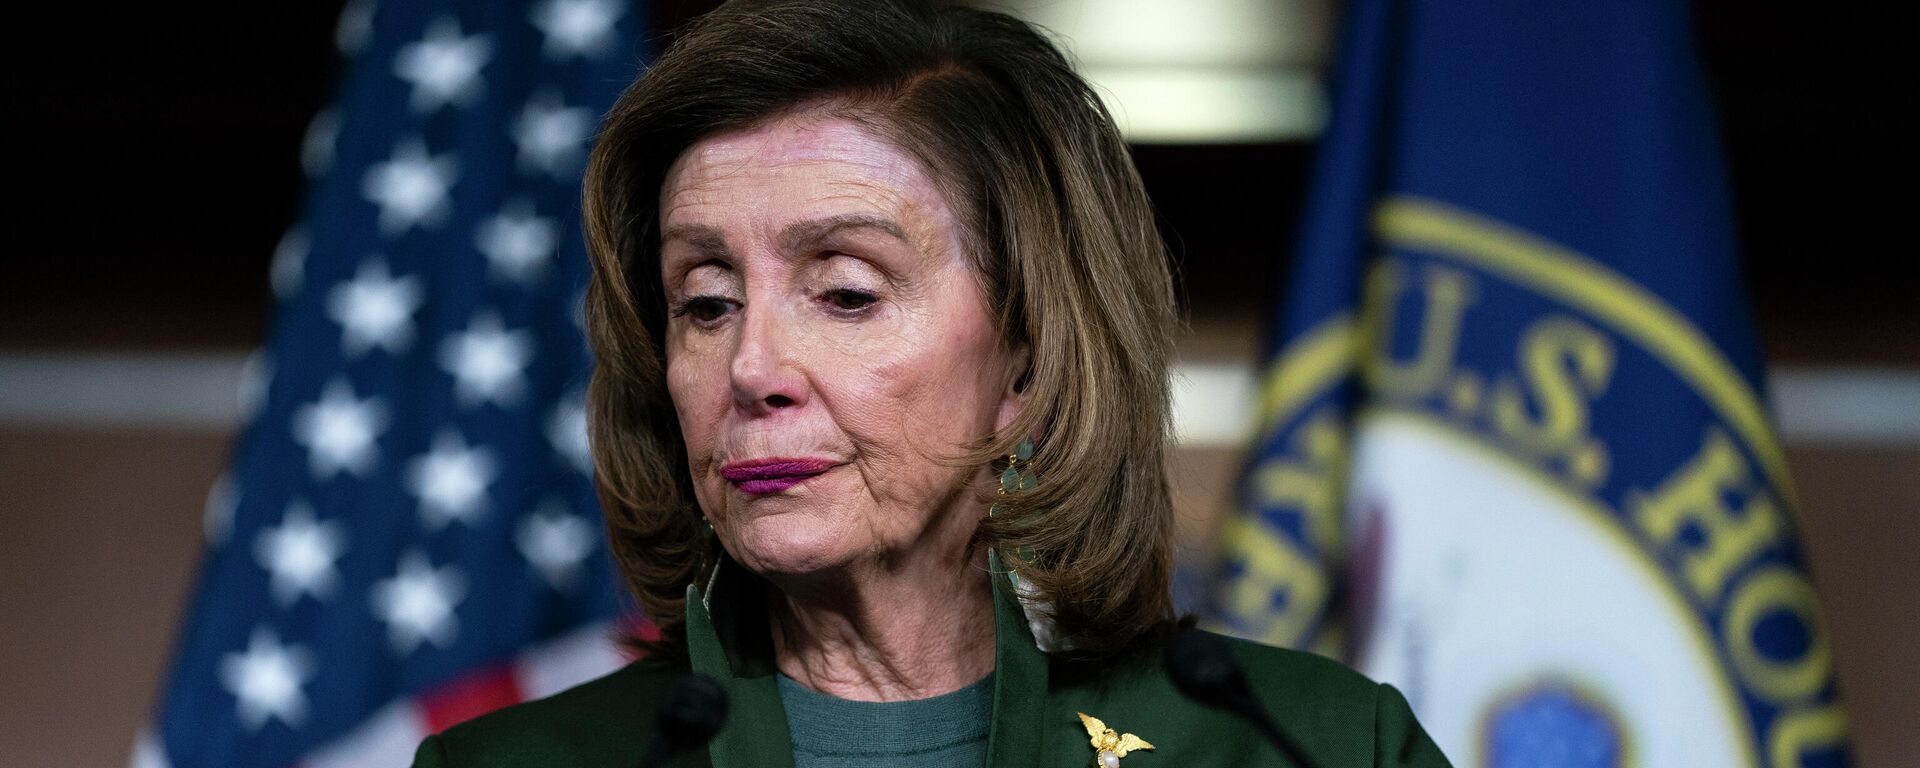 Speaker of the House Nancy Pelosi of Calif., pauses as she speaks during a news conference on Capitol Hill, Thursday, Feb. 3, 2022, in Washington - Sputnik International, 1920, 21.07.2022